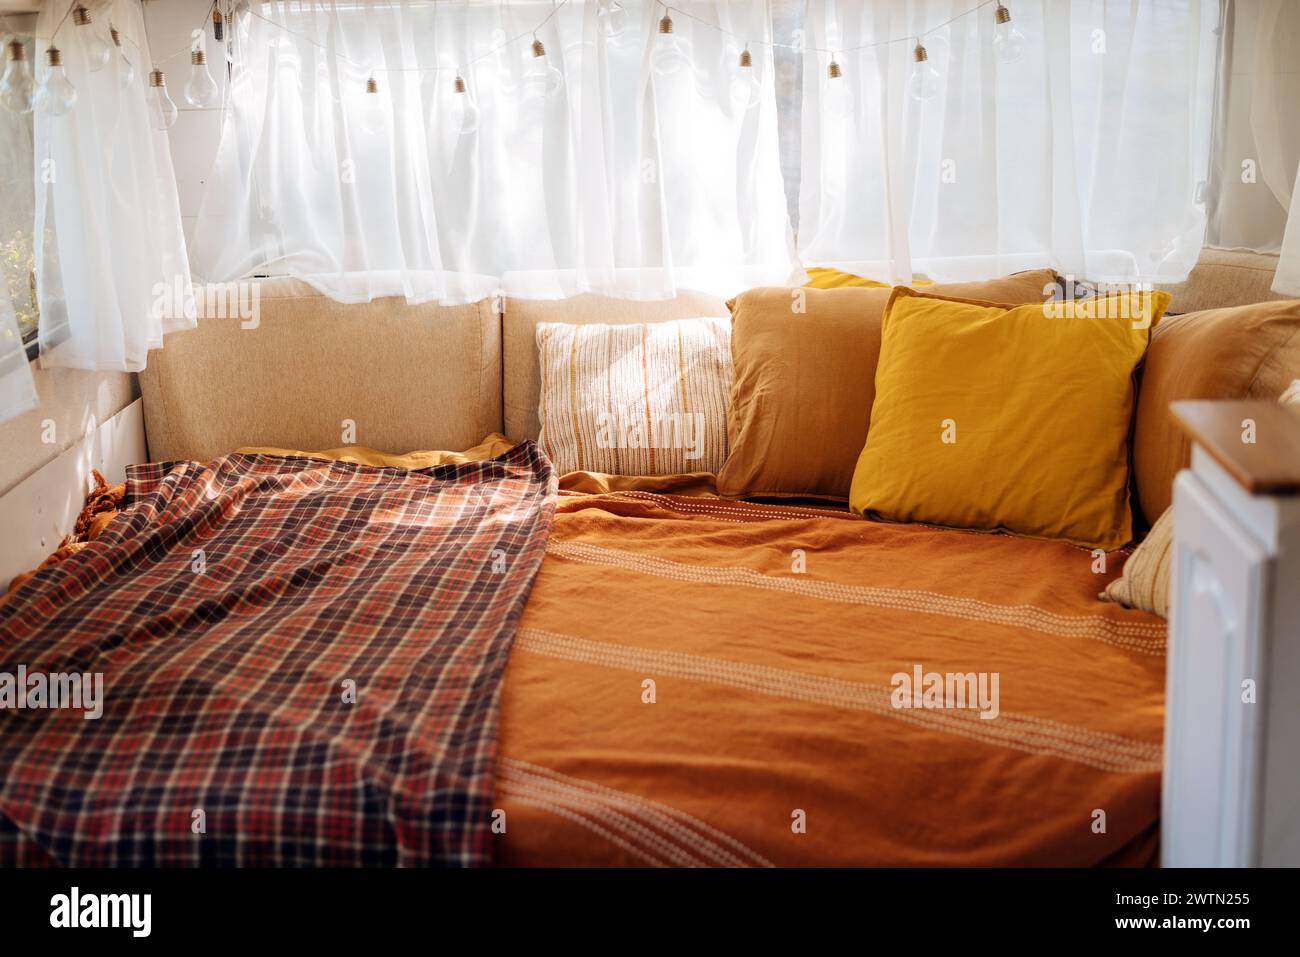 Cozy bedroom interior inspired by autumn colors. Pillows, light bed of a mobile home on wheels. Light bulbs. Stock Photo